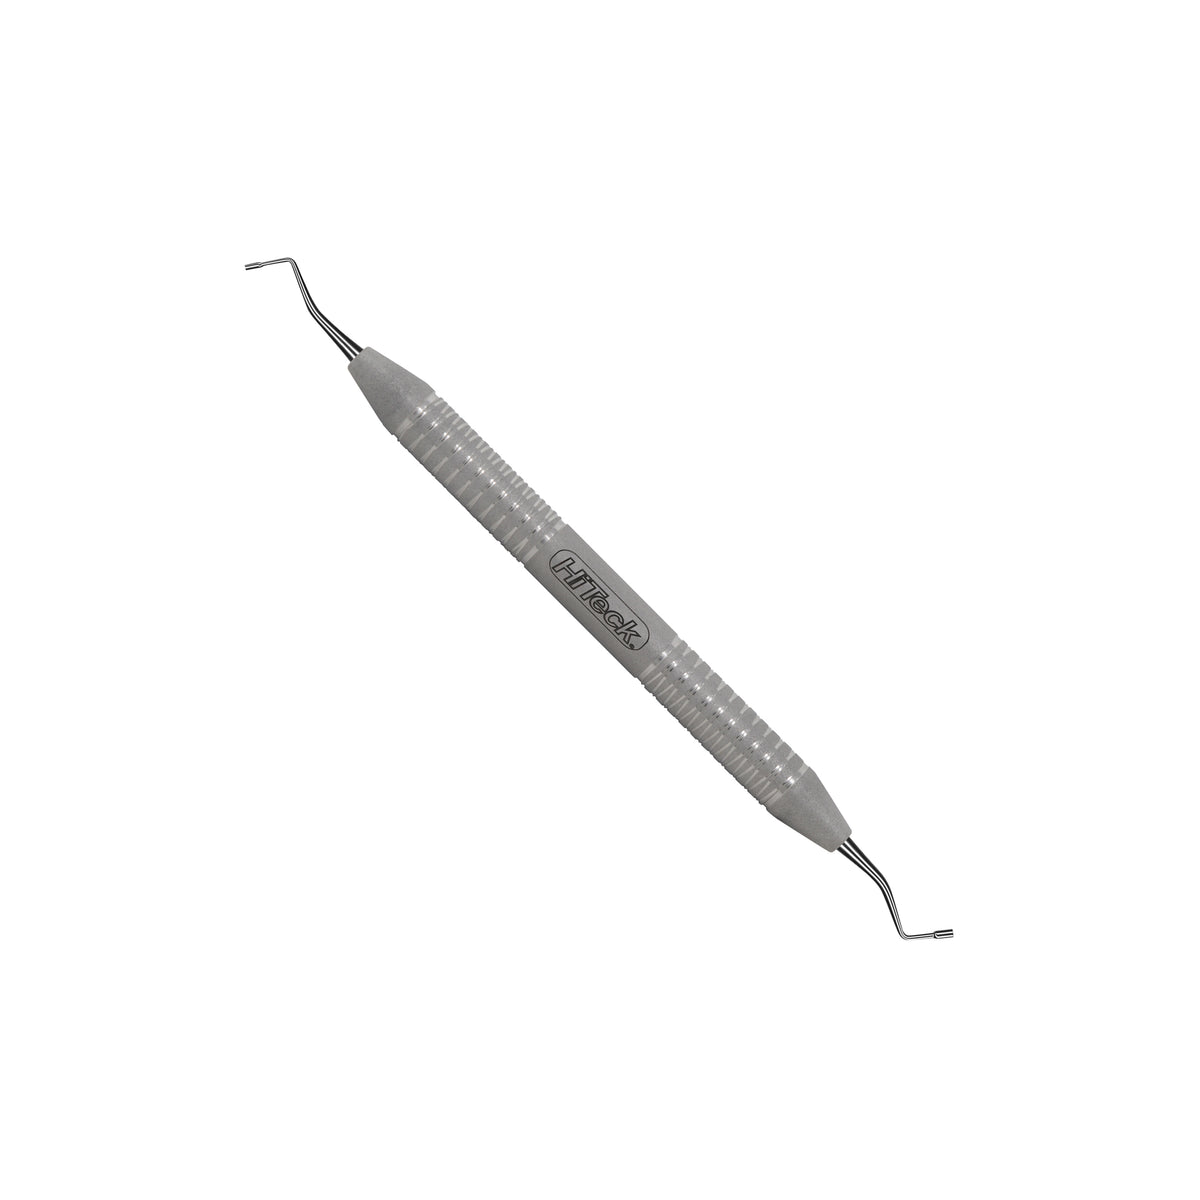 0/1 Marquette, 1.0MM/1.4MM Plugger/Condensor, Serrated - HiTeck Medical Instruments